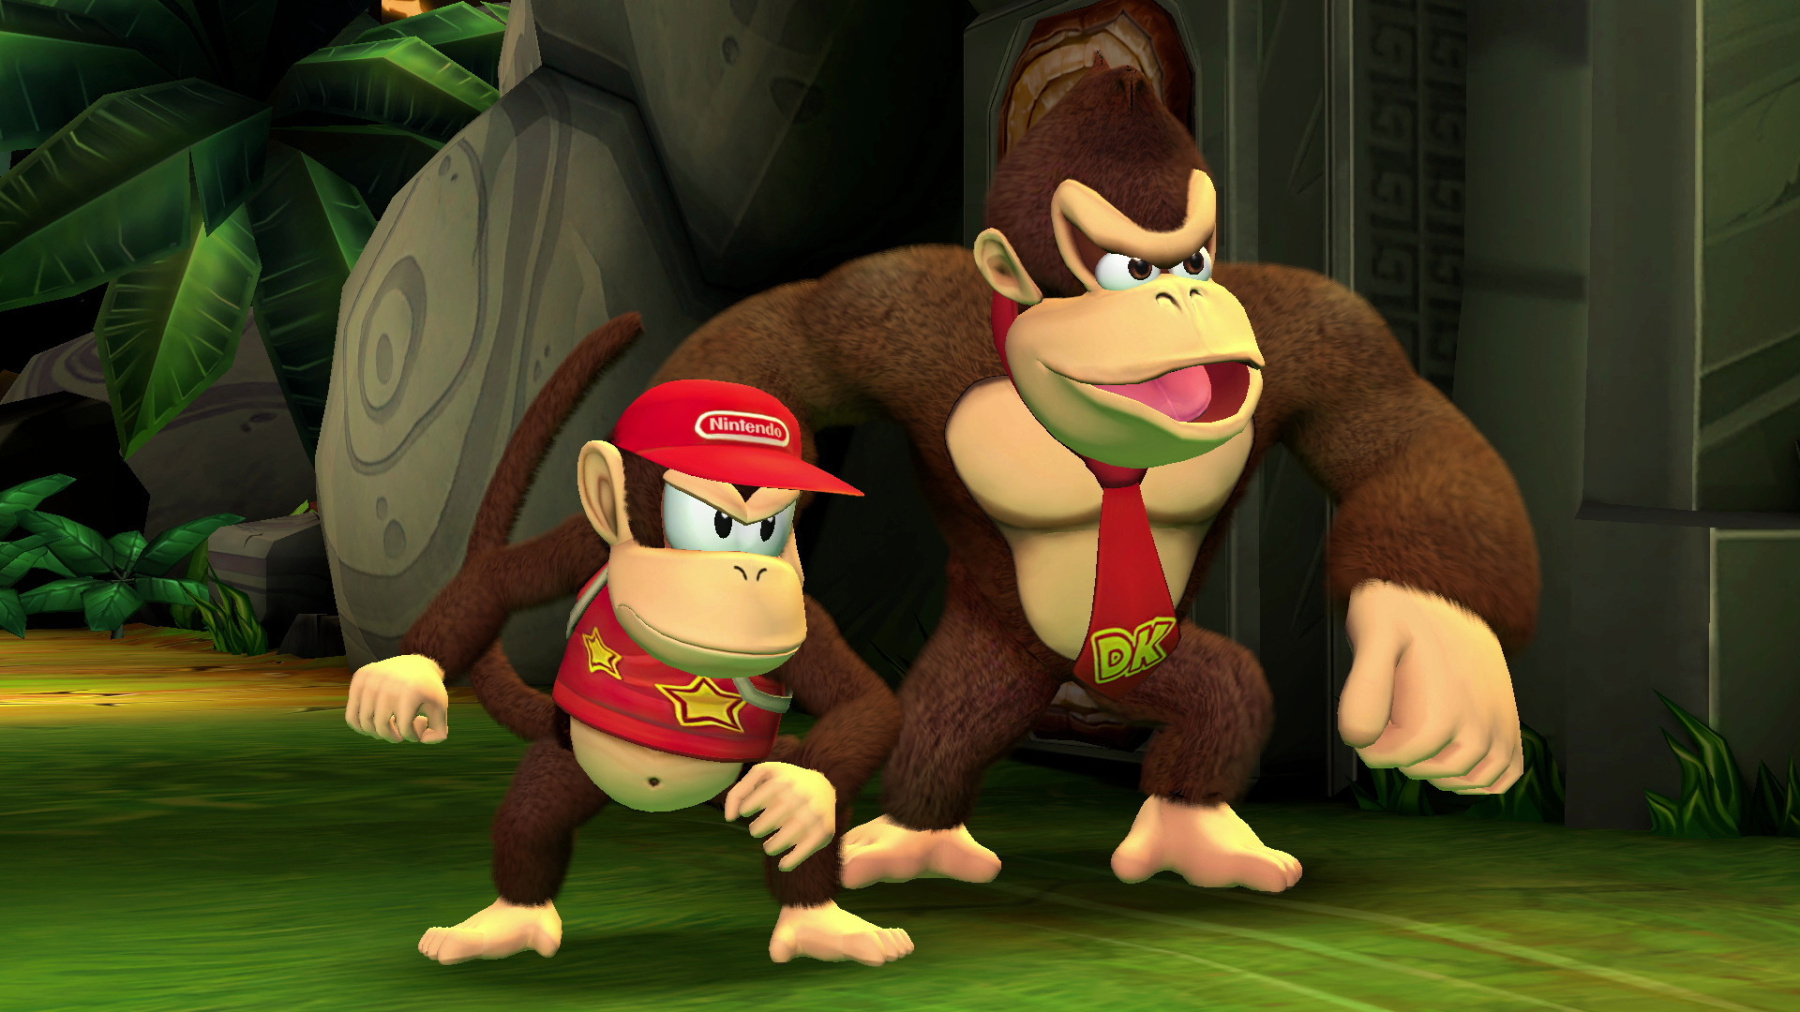 Polish studio Forever Entertainment is working on Donkey Kong Country Returns HD